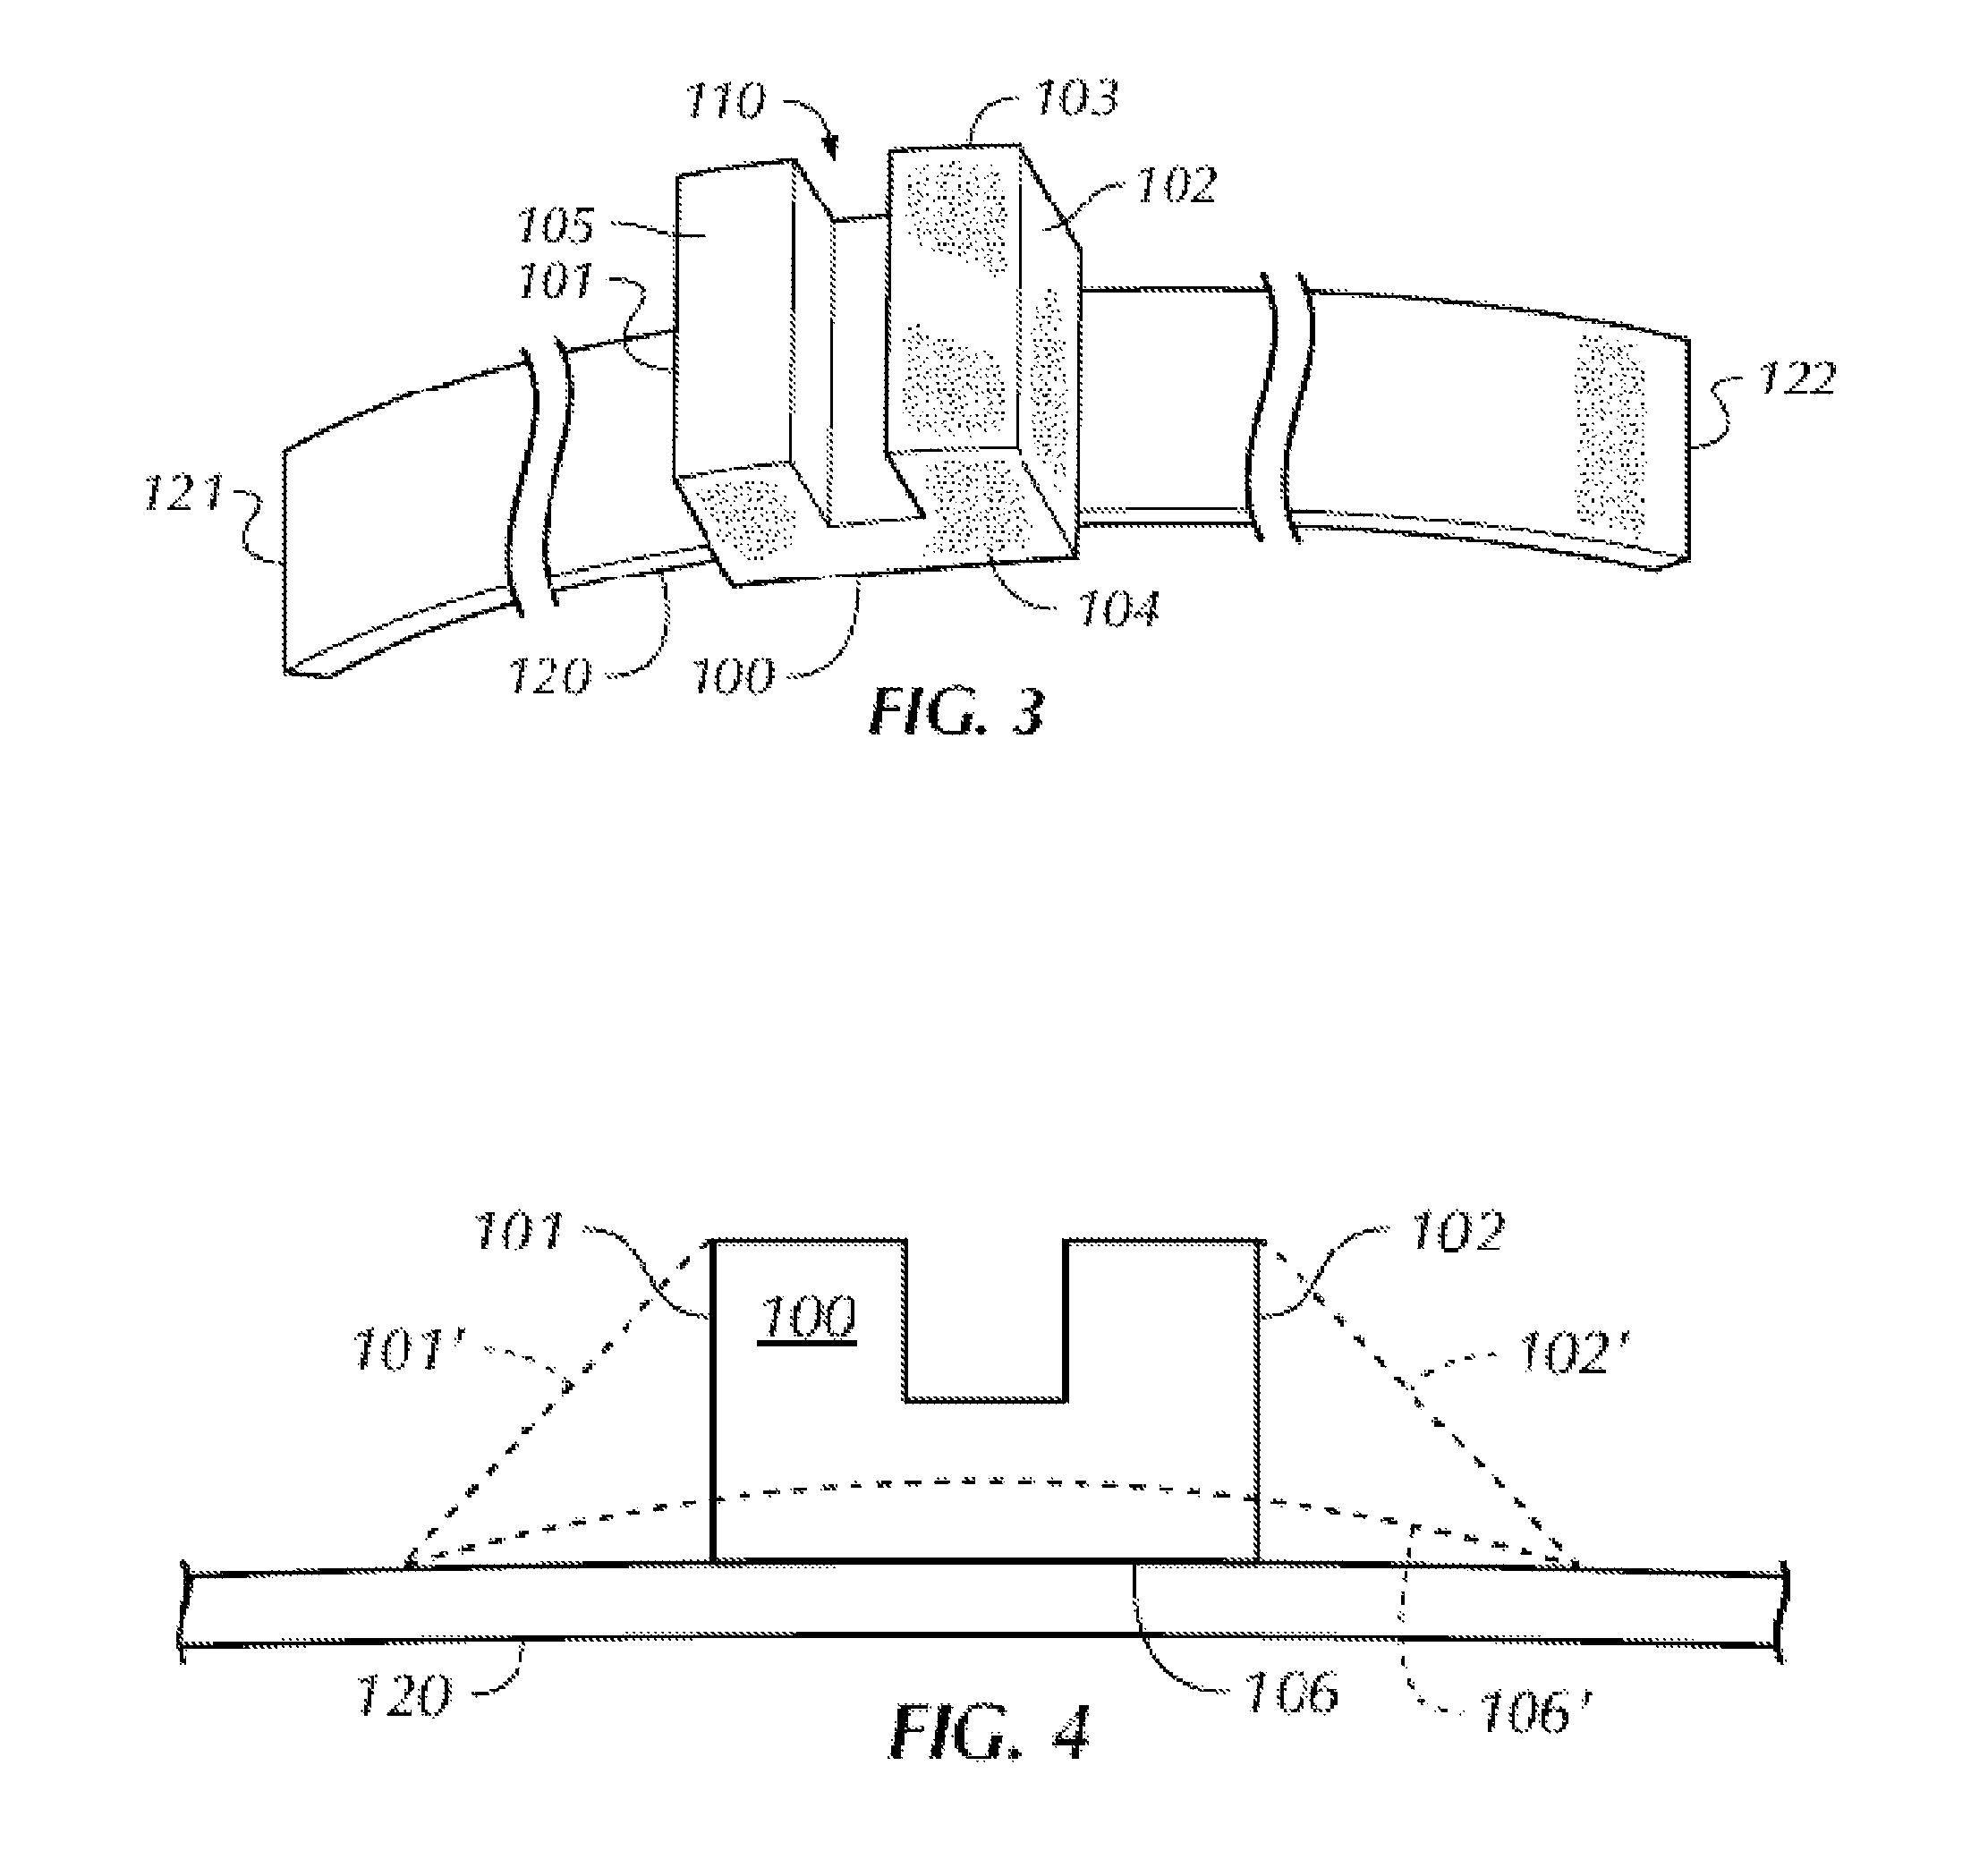 Medical tubing stabilization device